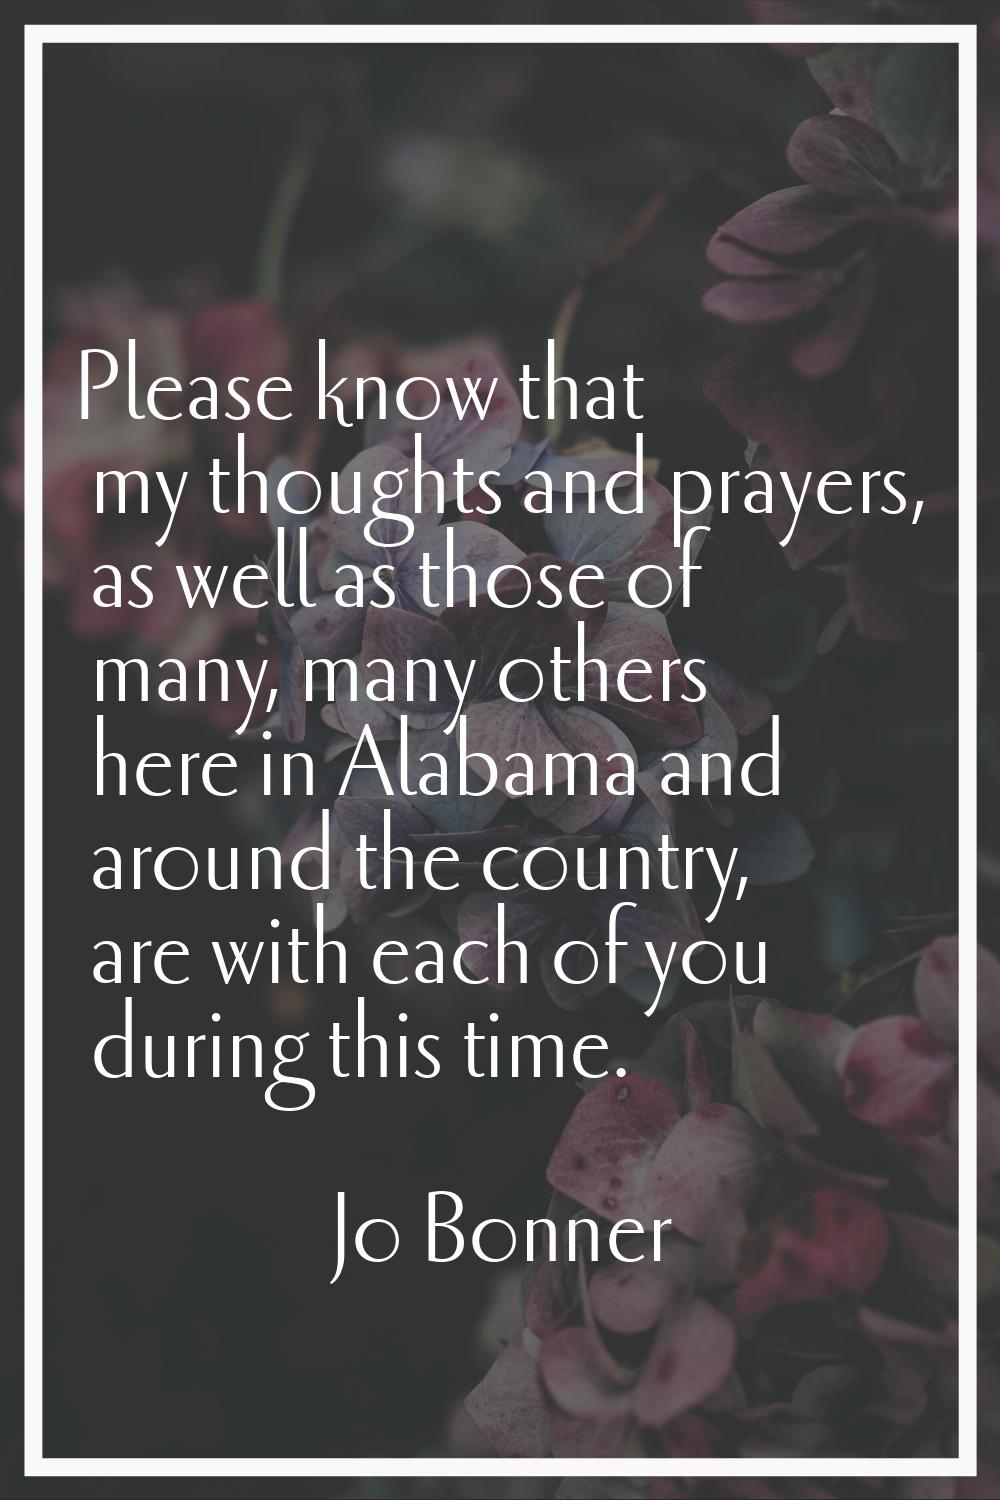 Please know that my thoughts and prayers, as well as those of many, many others here in Alabama and